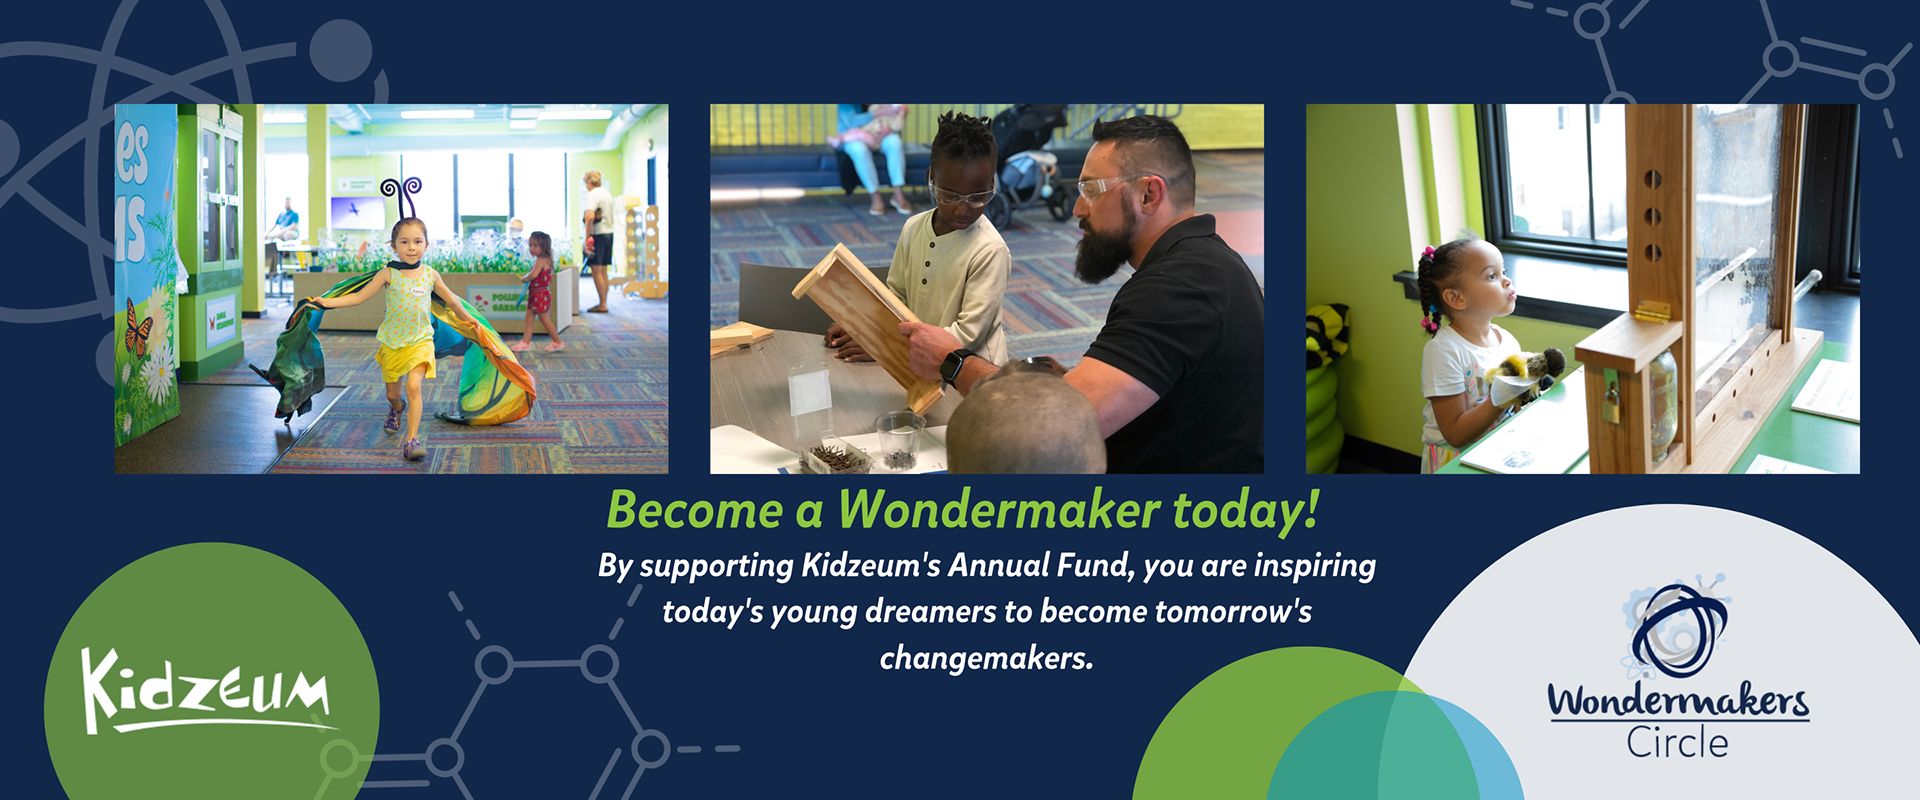 Become a Wondermaker